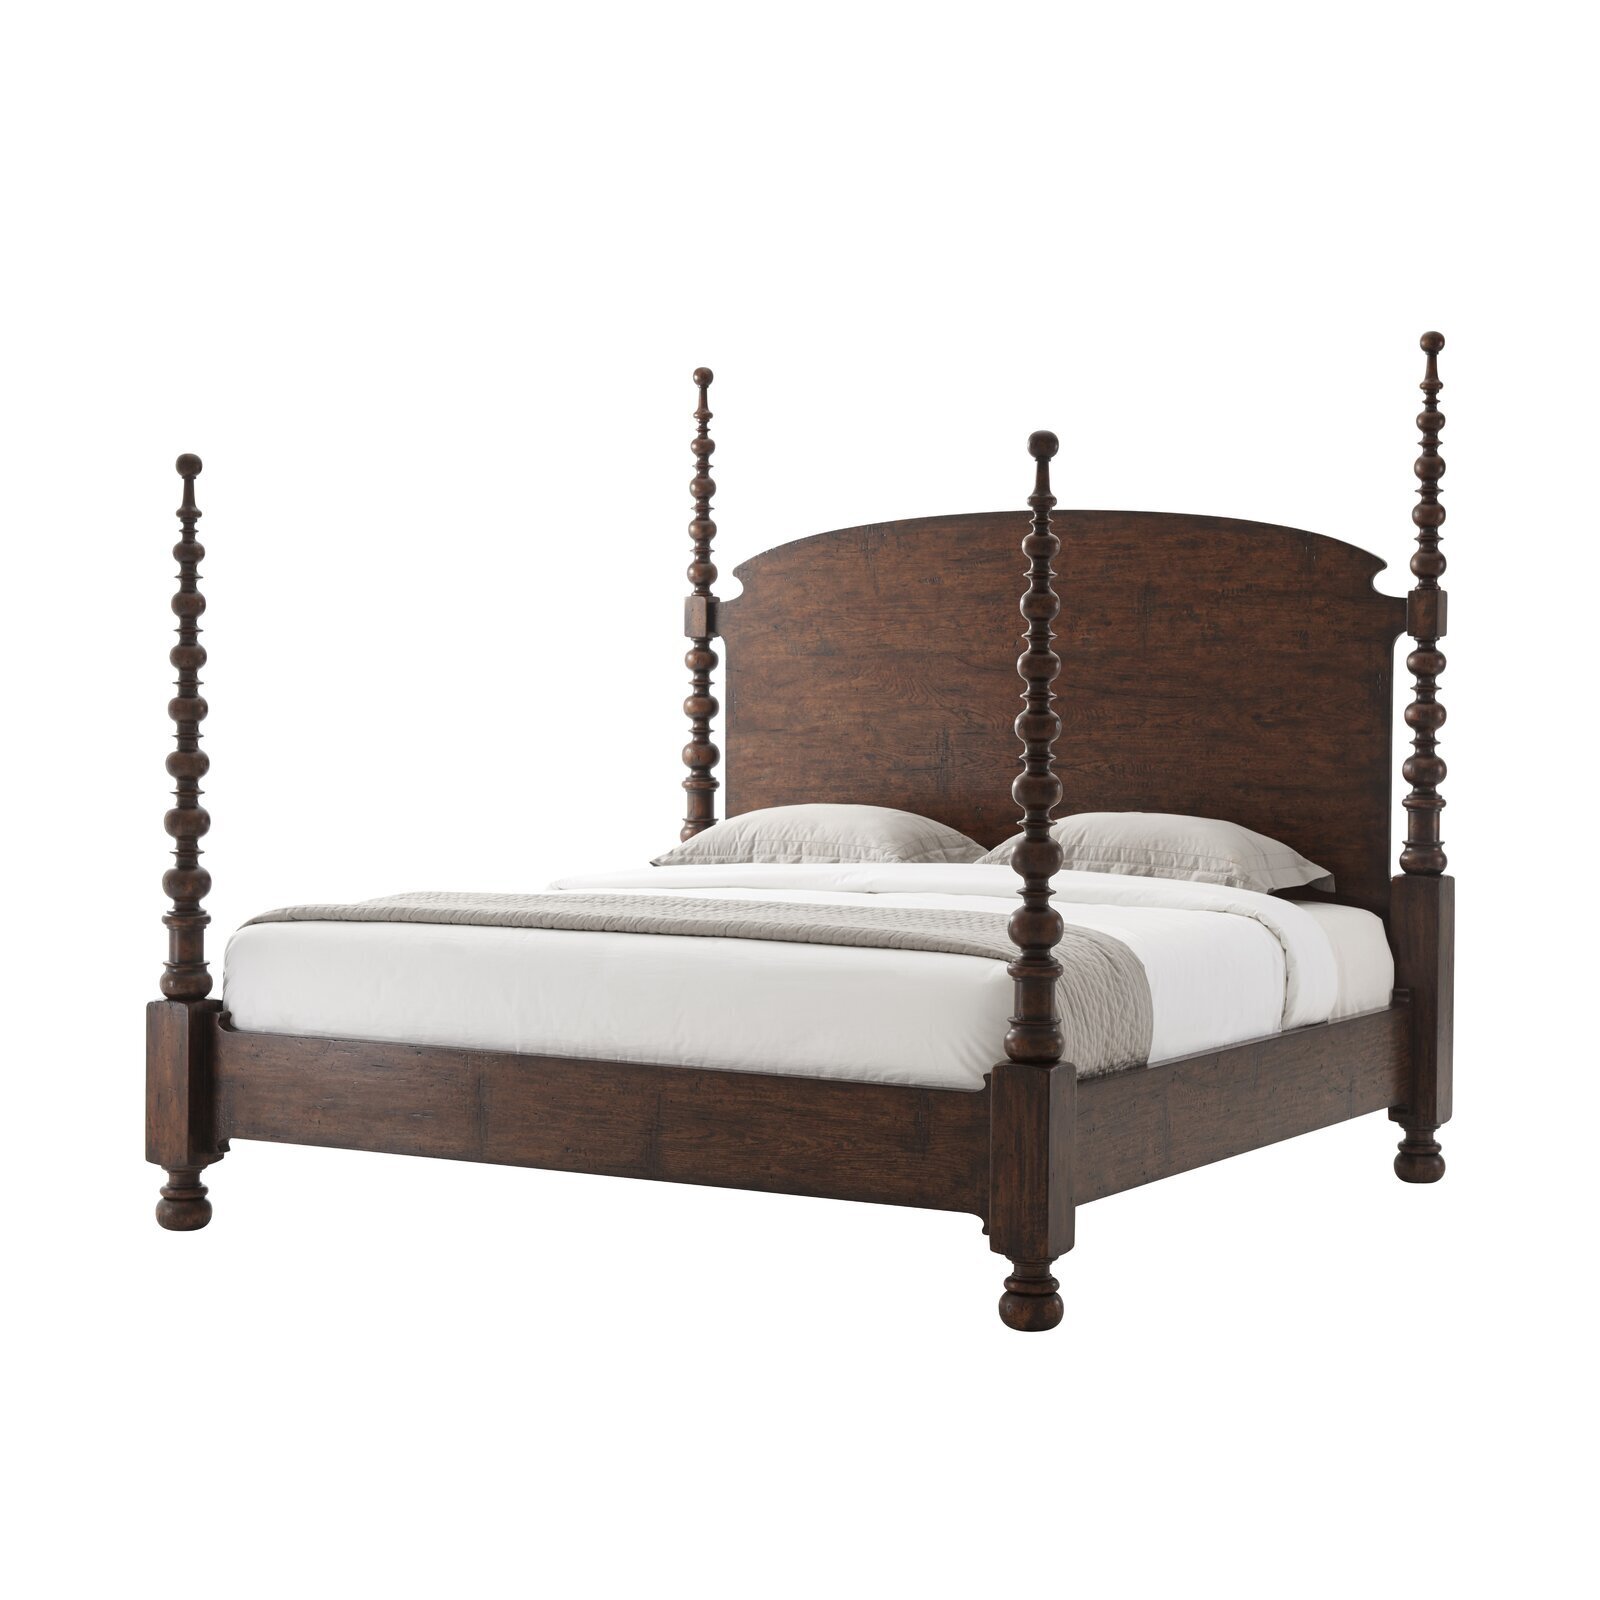 Solid wood poster bed